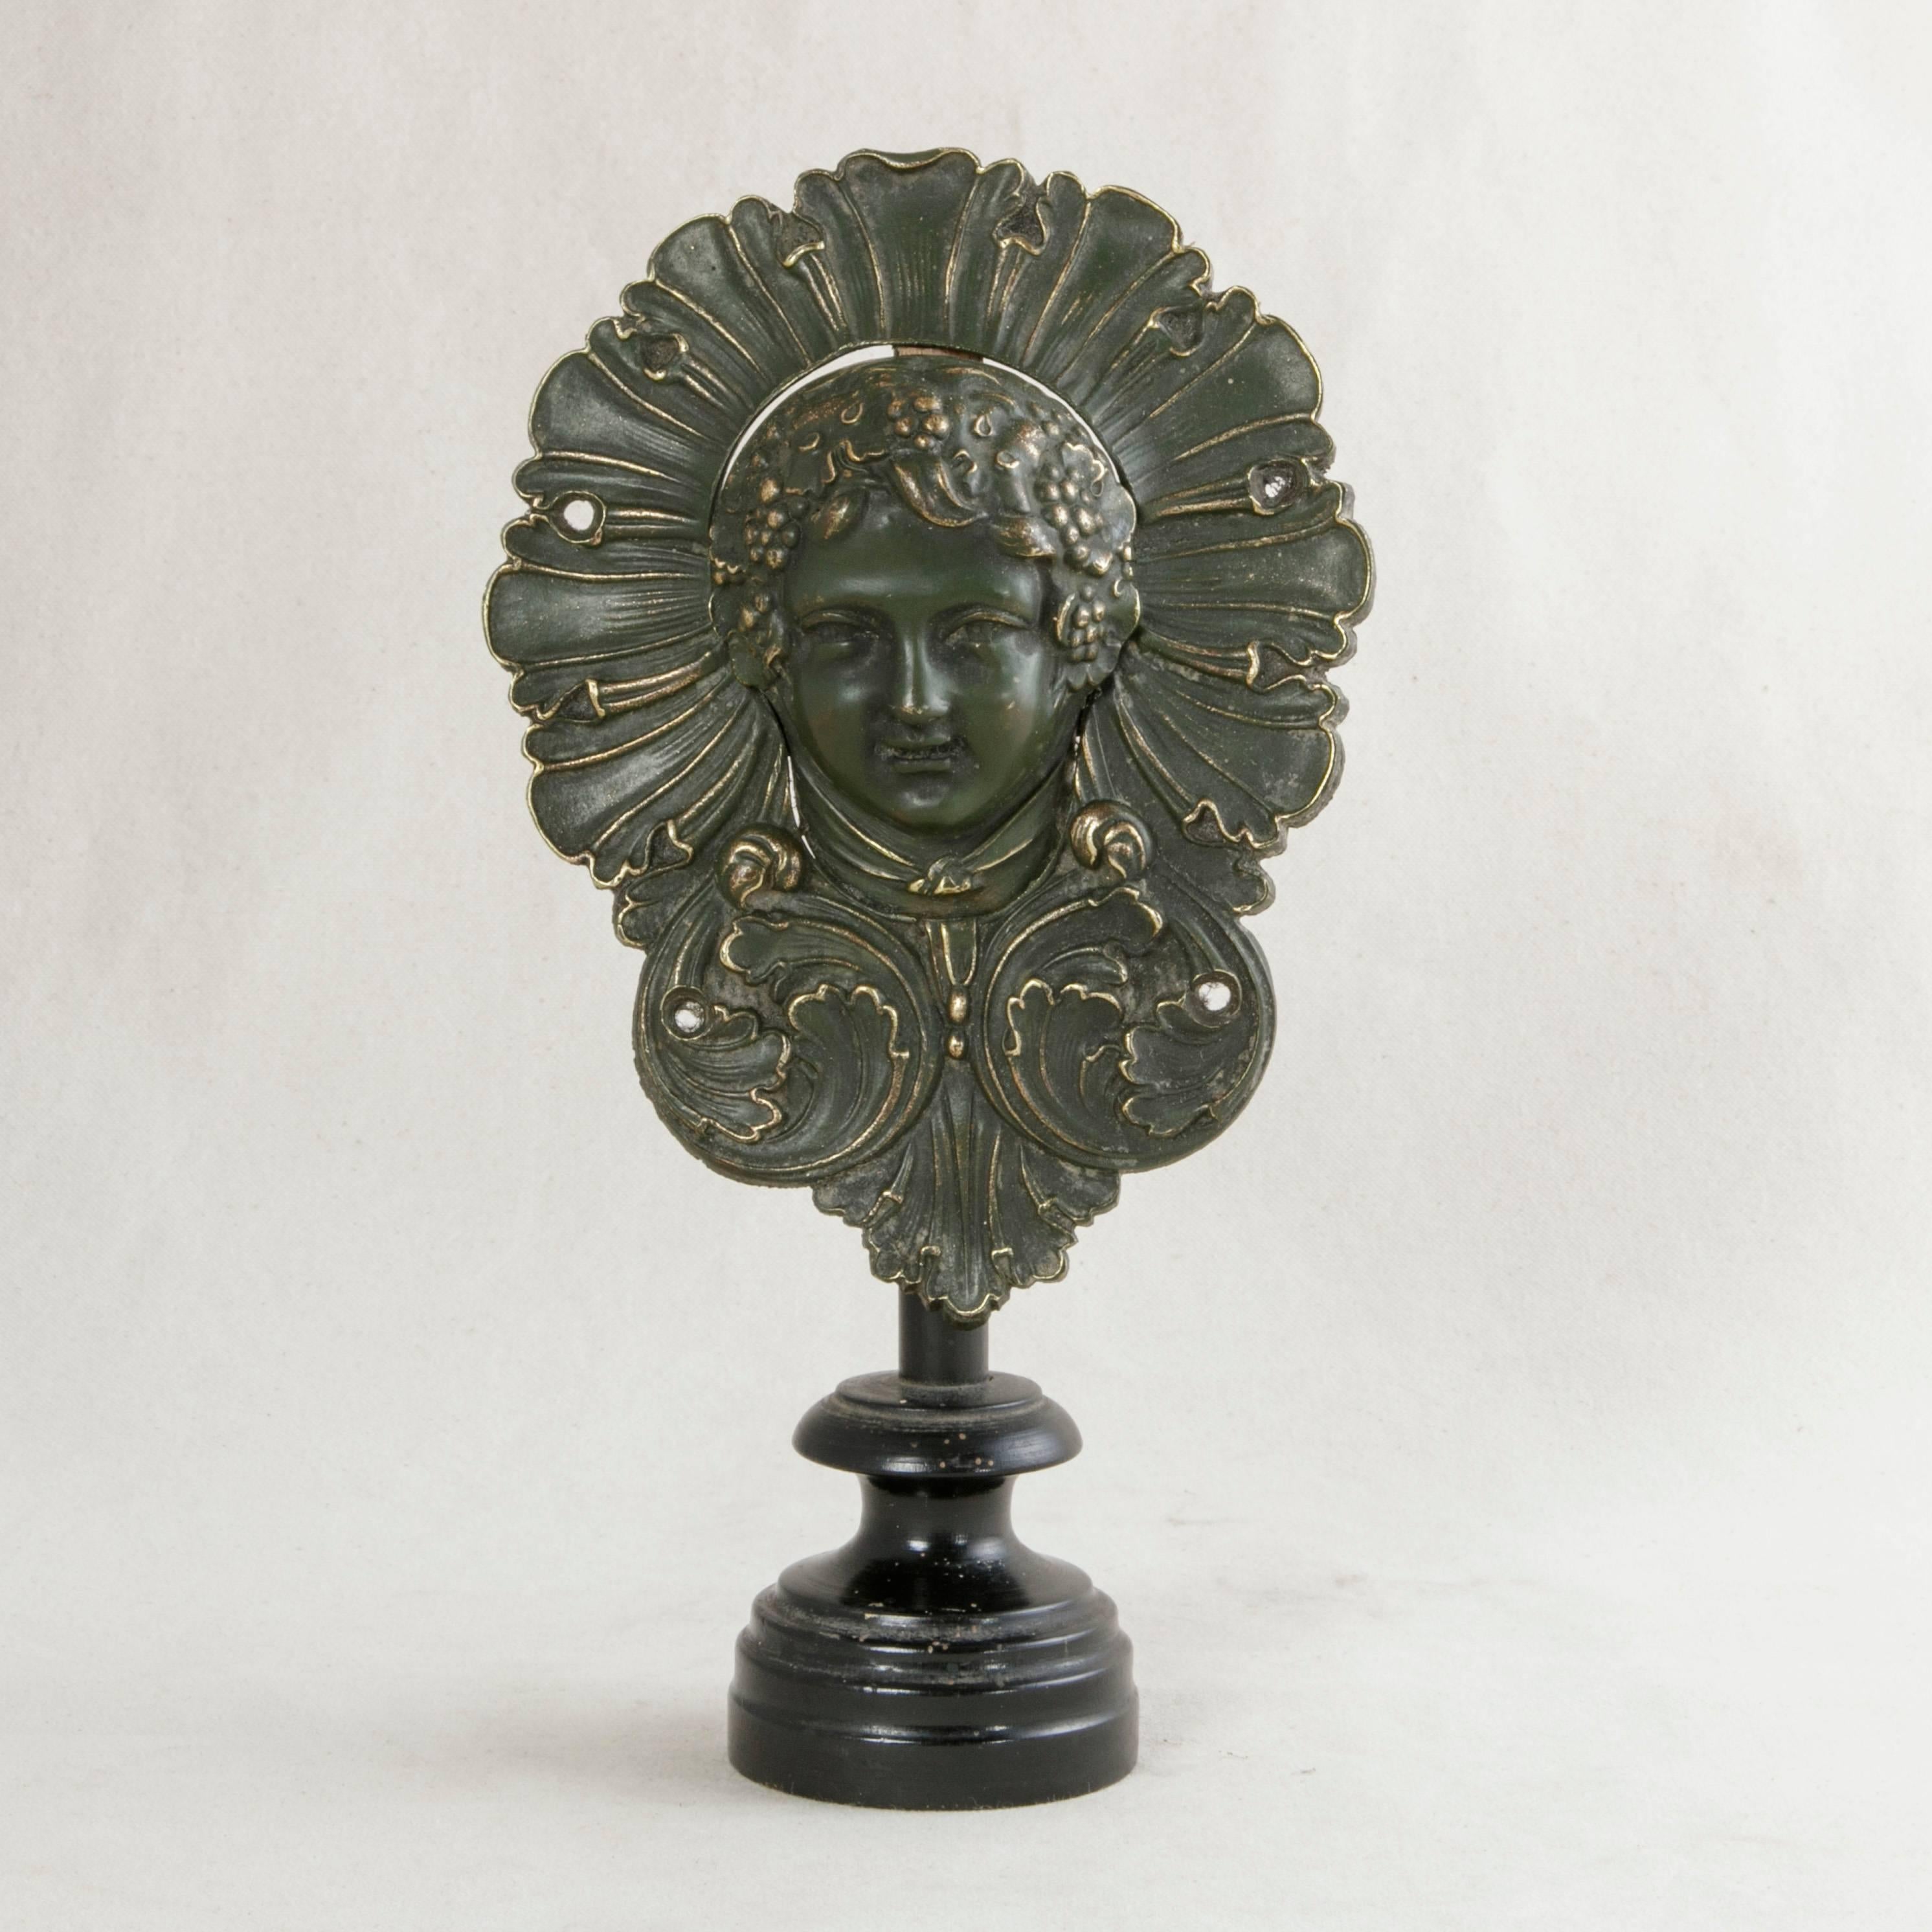 Bacchus, the god of wine, is presented in bronze in this unusual billiard pocket from the Napoleon III period. This smiling face, wearing a crown of grapes and grape leaves surrounded by a halo of stylized petals and acanthus leaves, originally